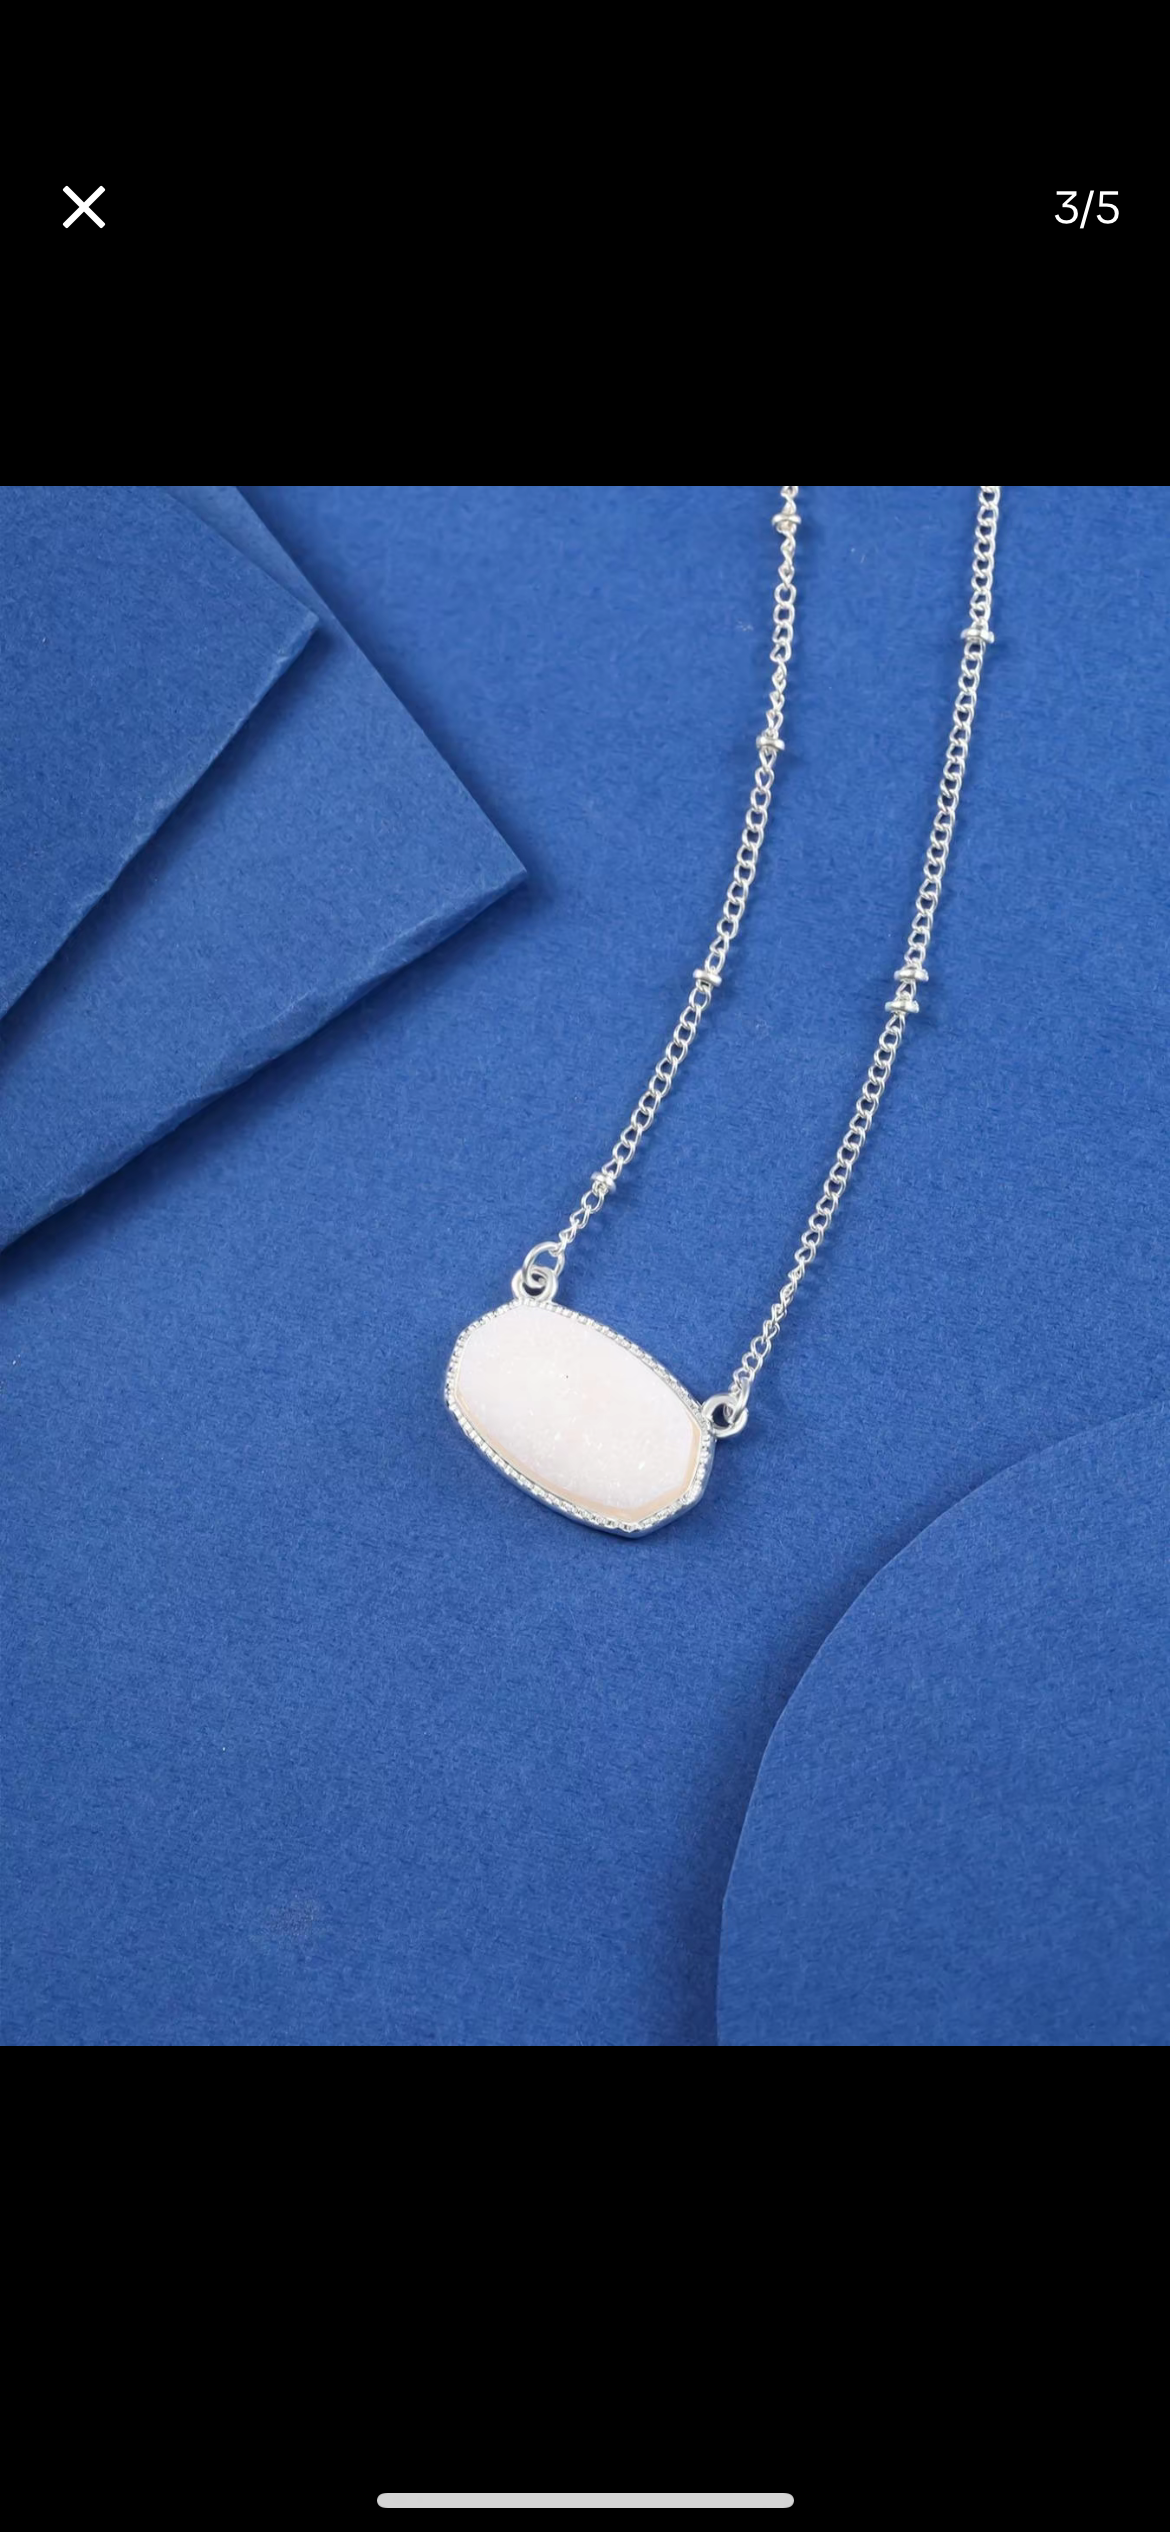 Square Shaped Charm Necklace